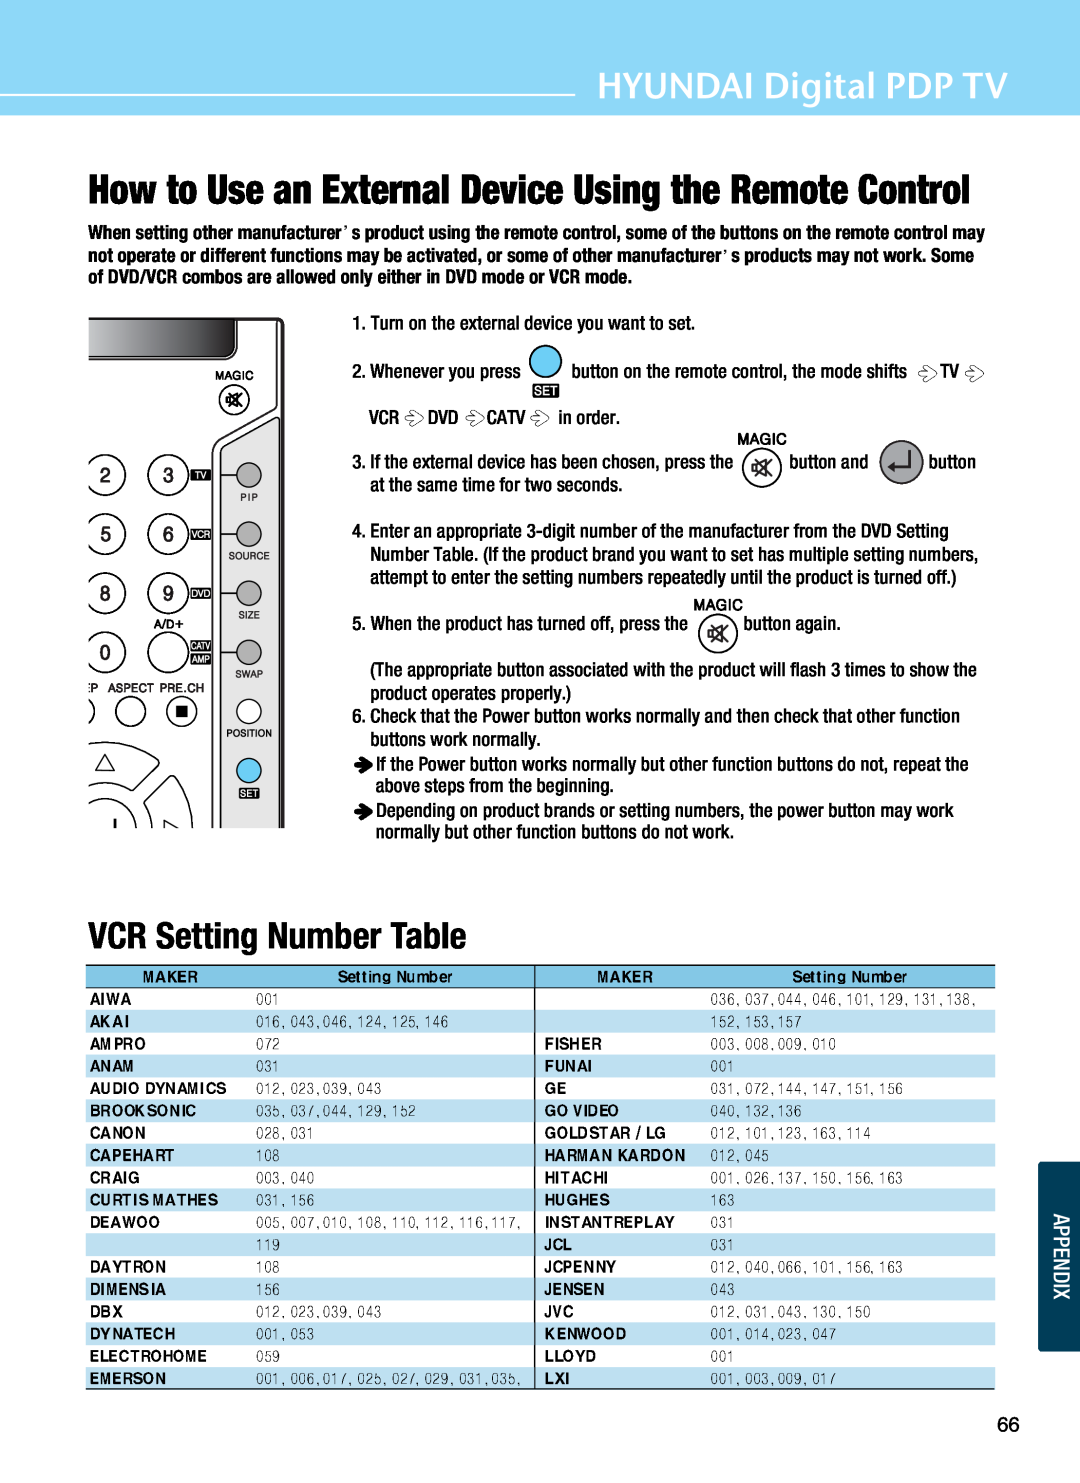 Hyundai Q421S VCR Setting Number Table, HYUNDAI Digital PDP TV, How to Use an External Device Using the Remote Control 